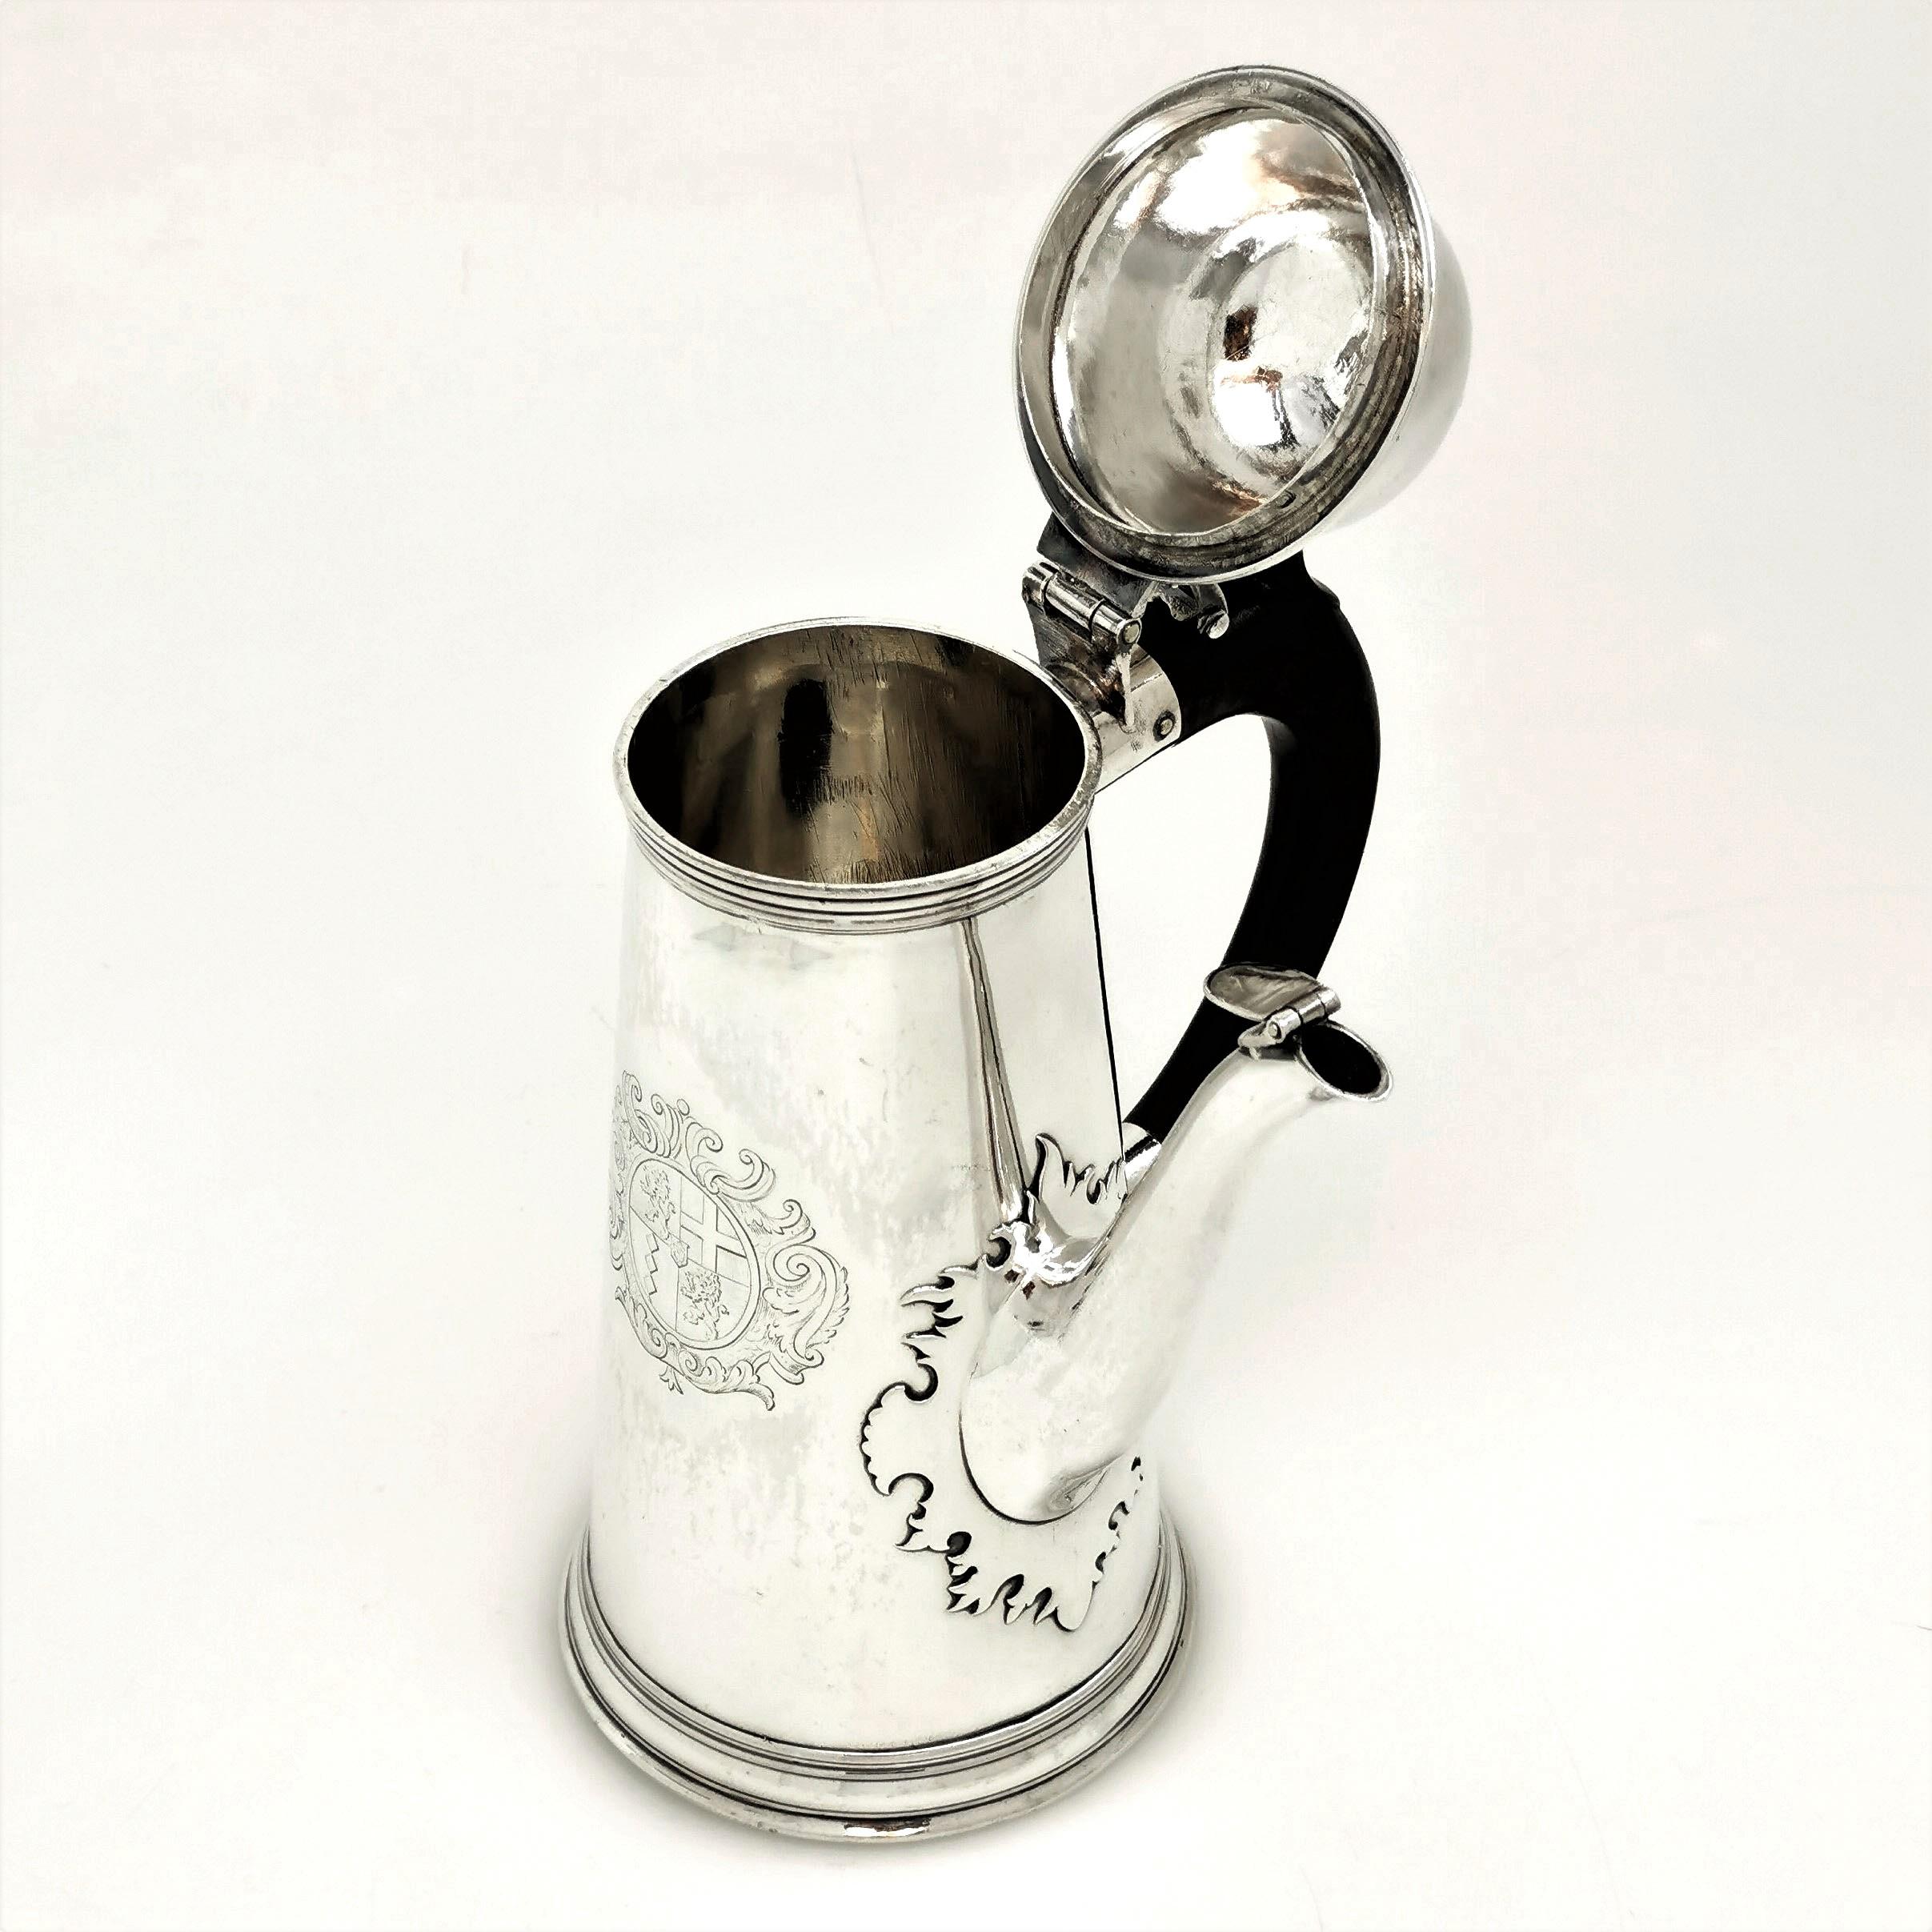 XVIIIe siècle Antique Queen Anne Sterling Silver Coffee Pot Side Handled 1703 18th Century en vente